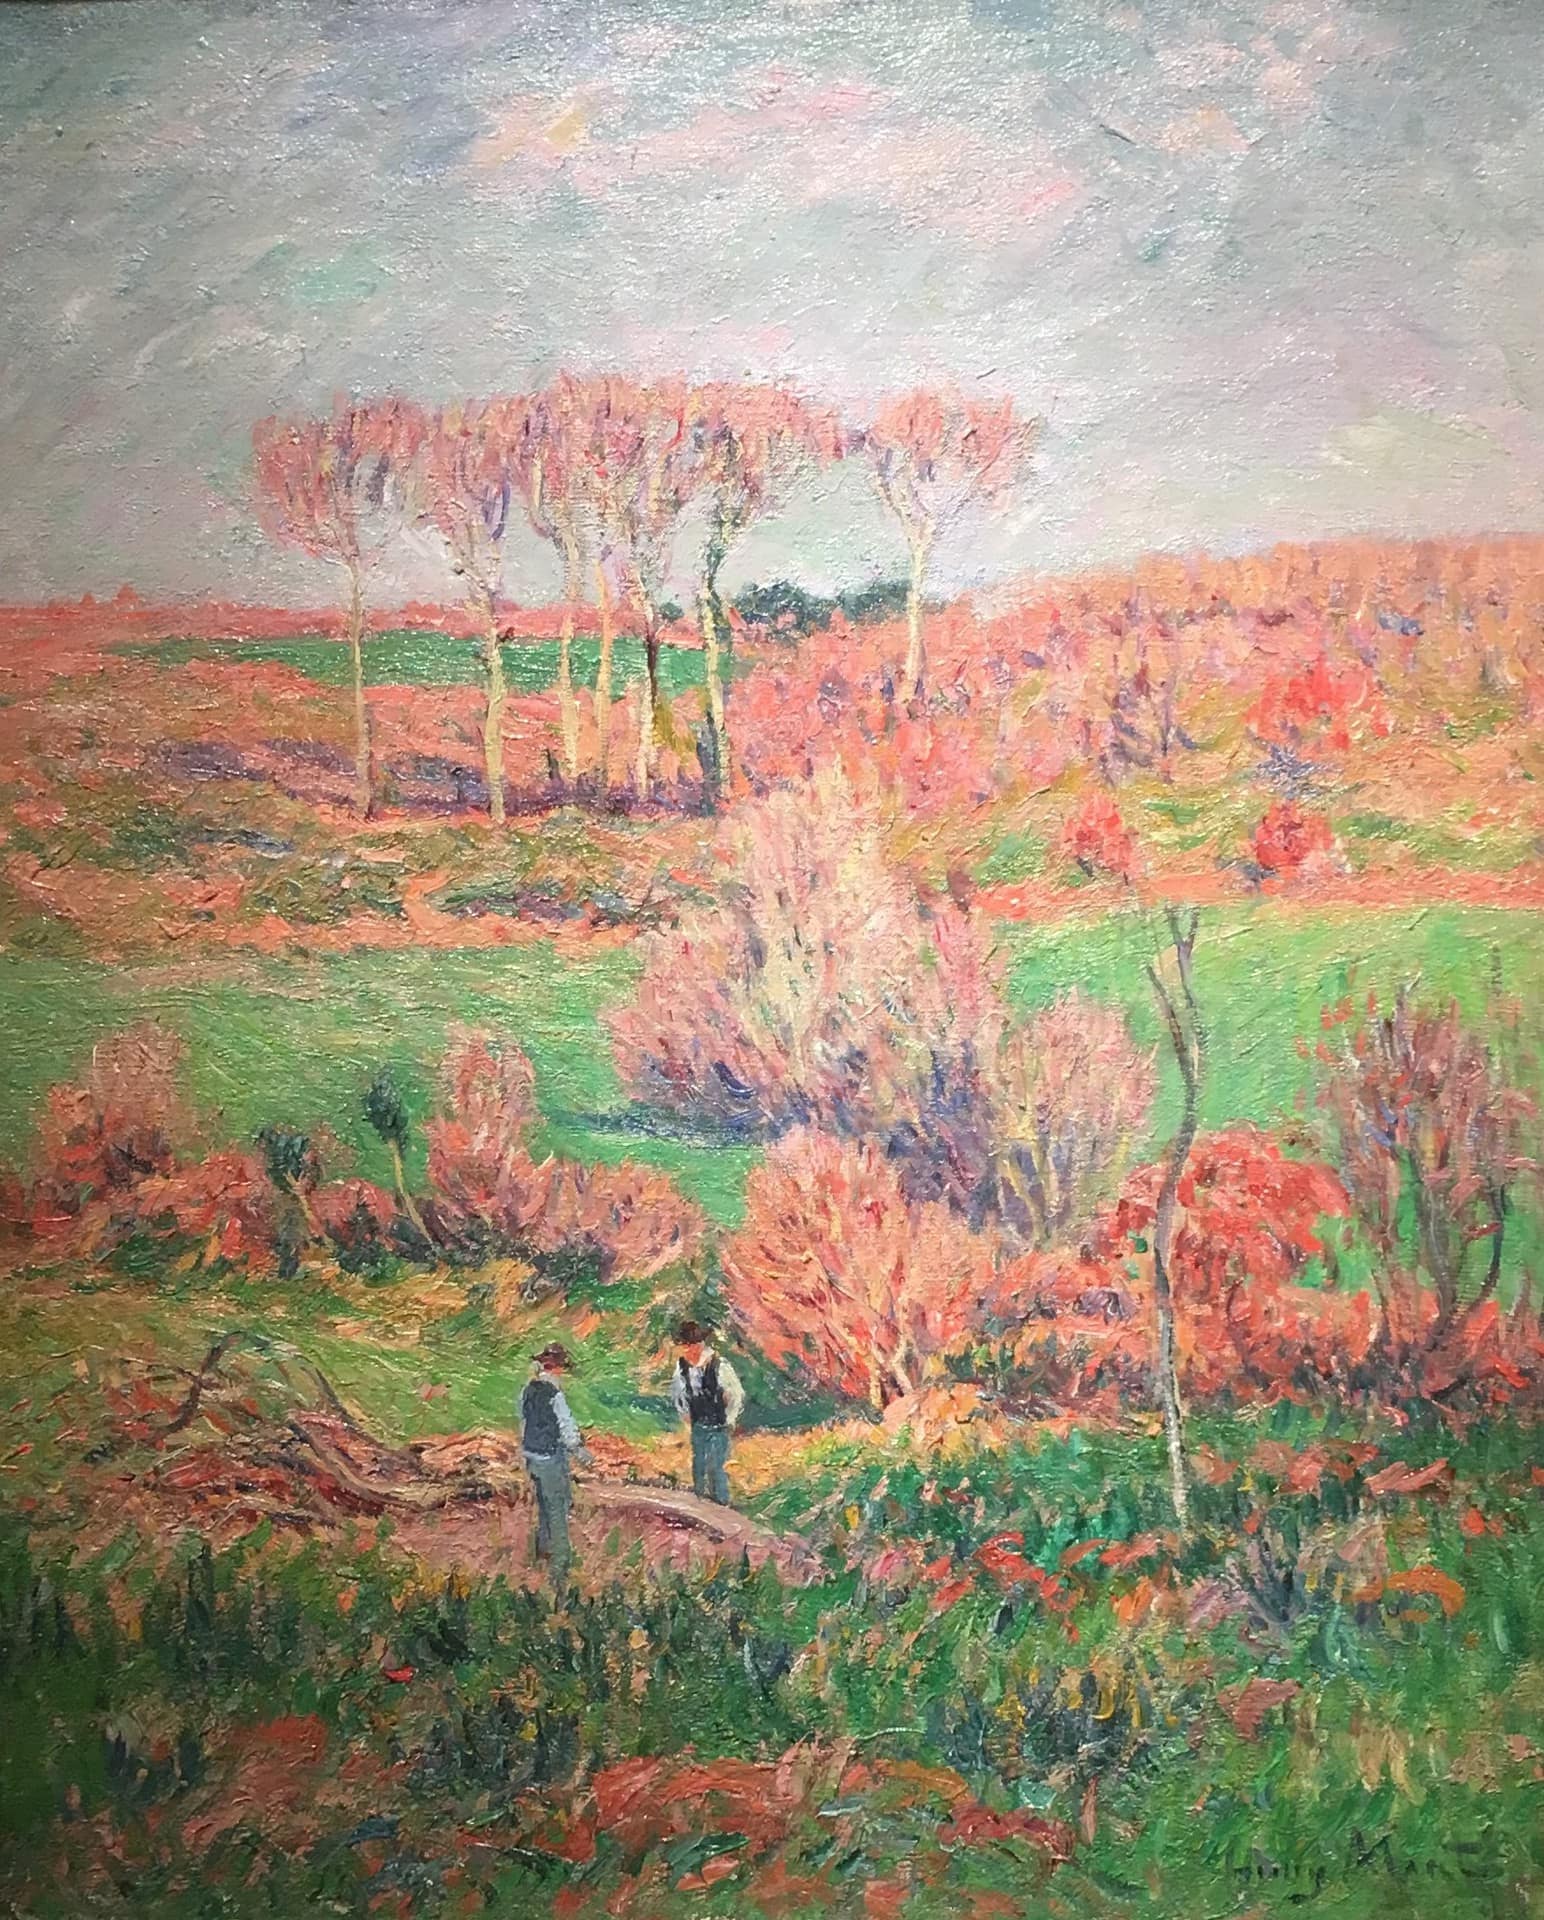 Henry Moret's forgerons pres de Doelan. Impressionist brushwork. Fantastic colors - pink leaved trees and shrubbery. Two boys stand over a felled tree in the foreground.